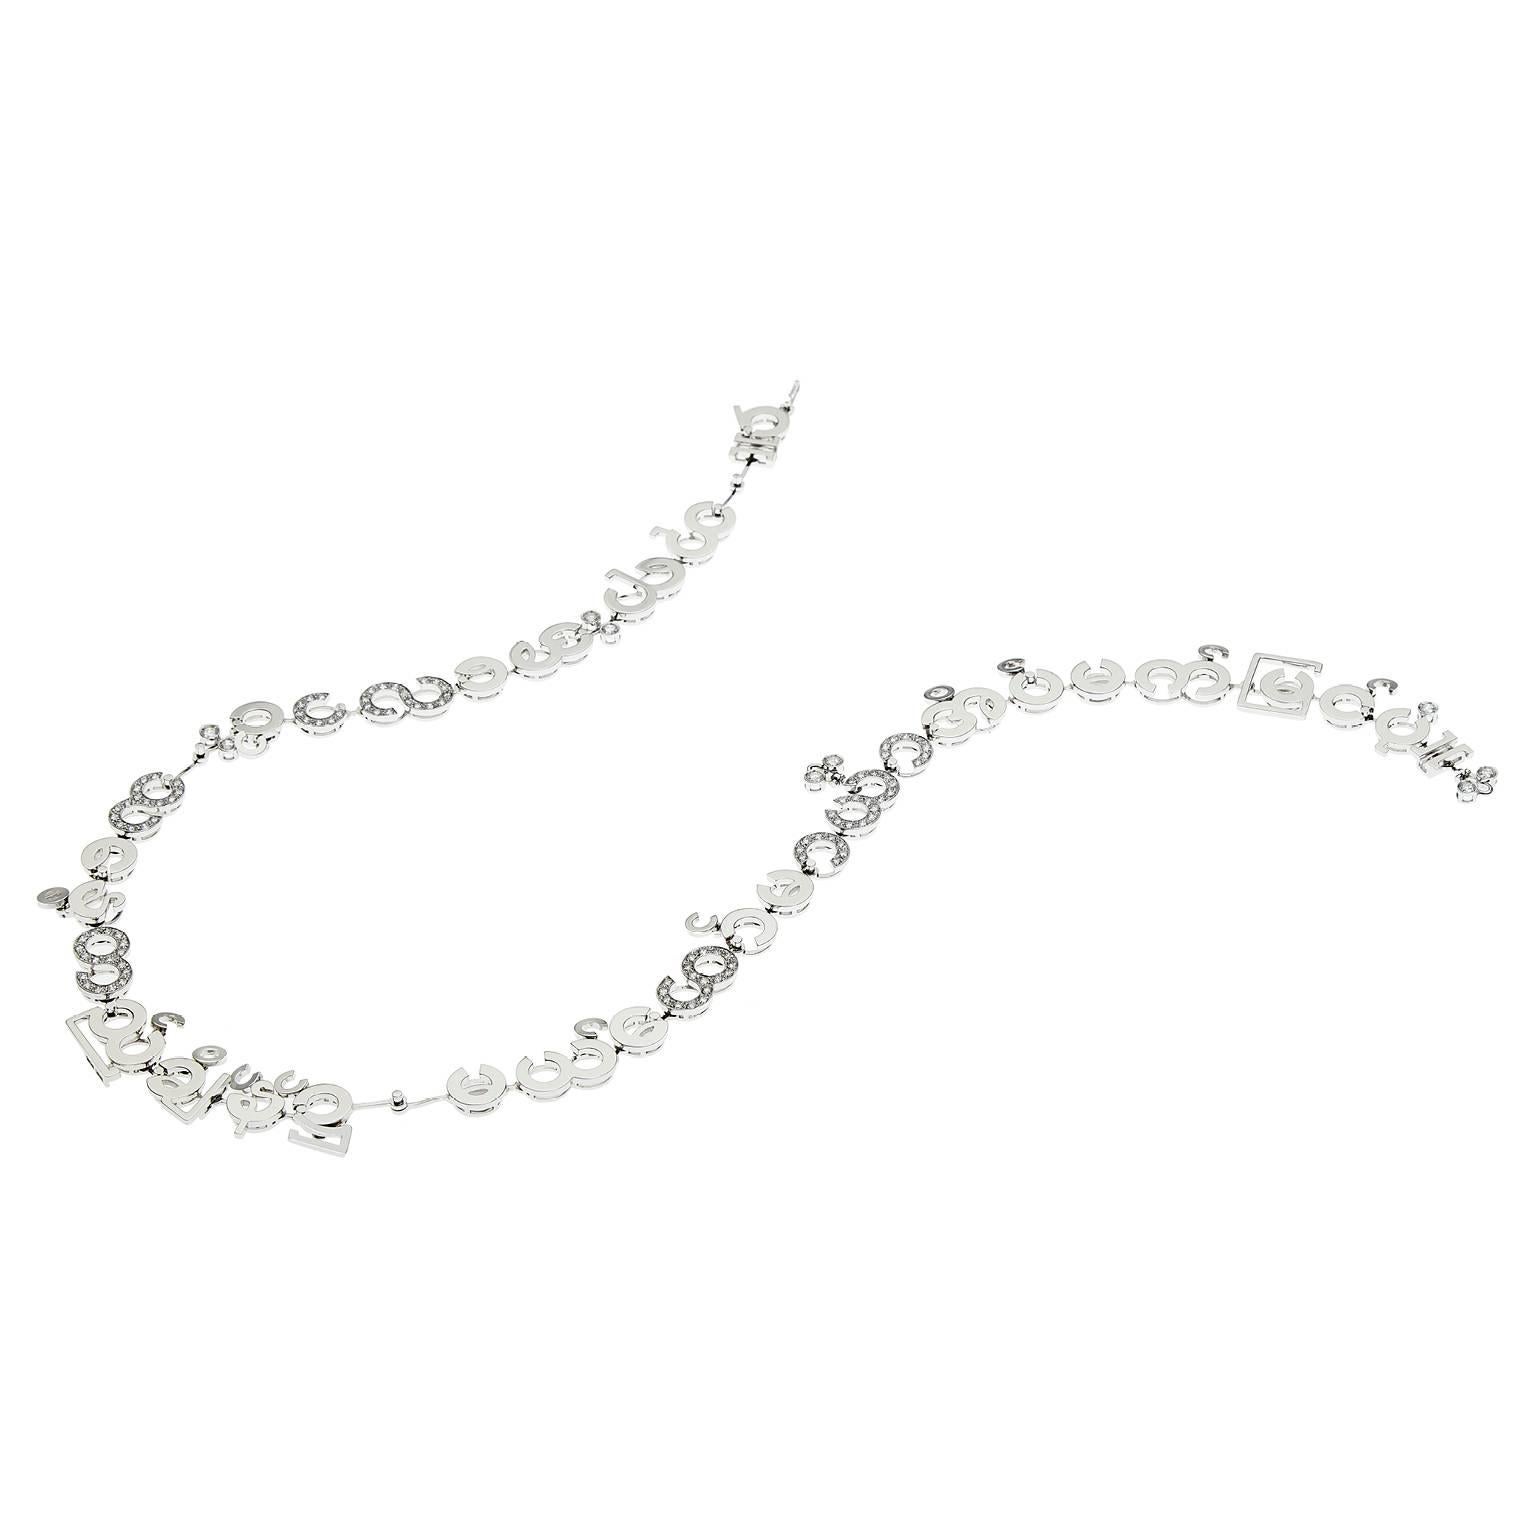 Nathalie Jean Contemporary 3.05 Carat Diamond White Gold Chain Drop Necklace For Sale 1